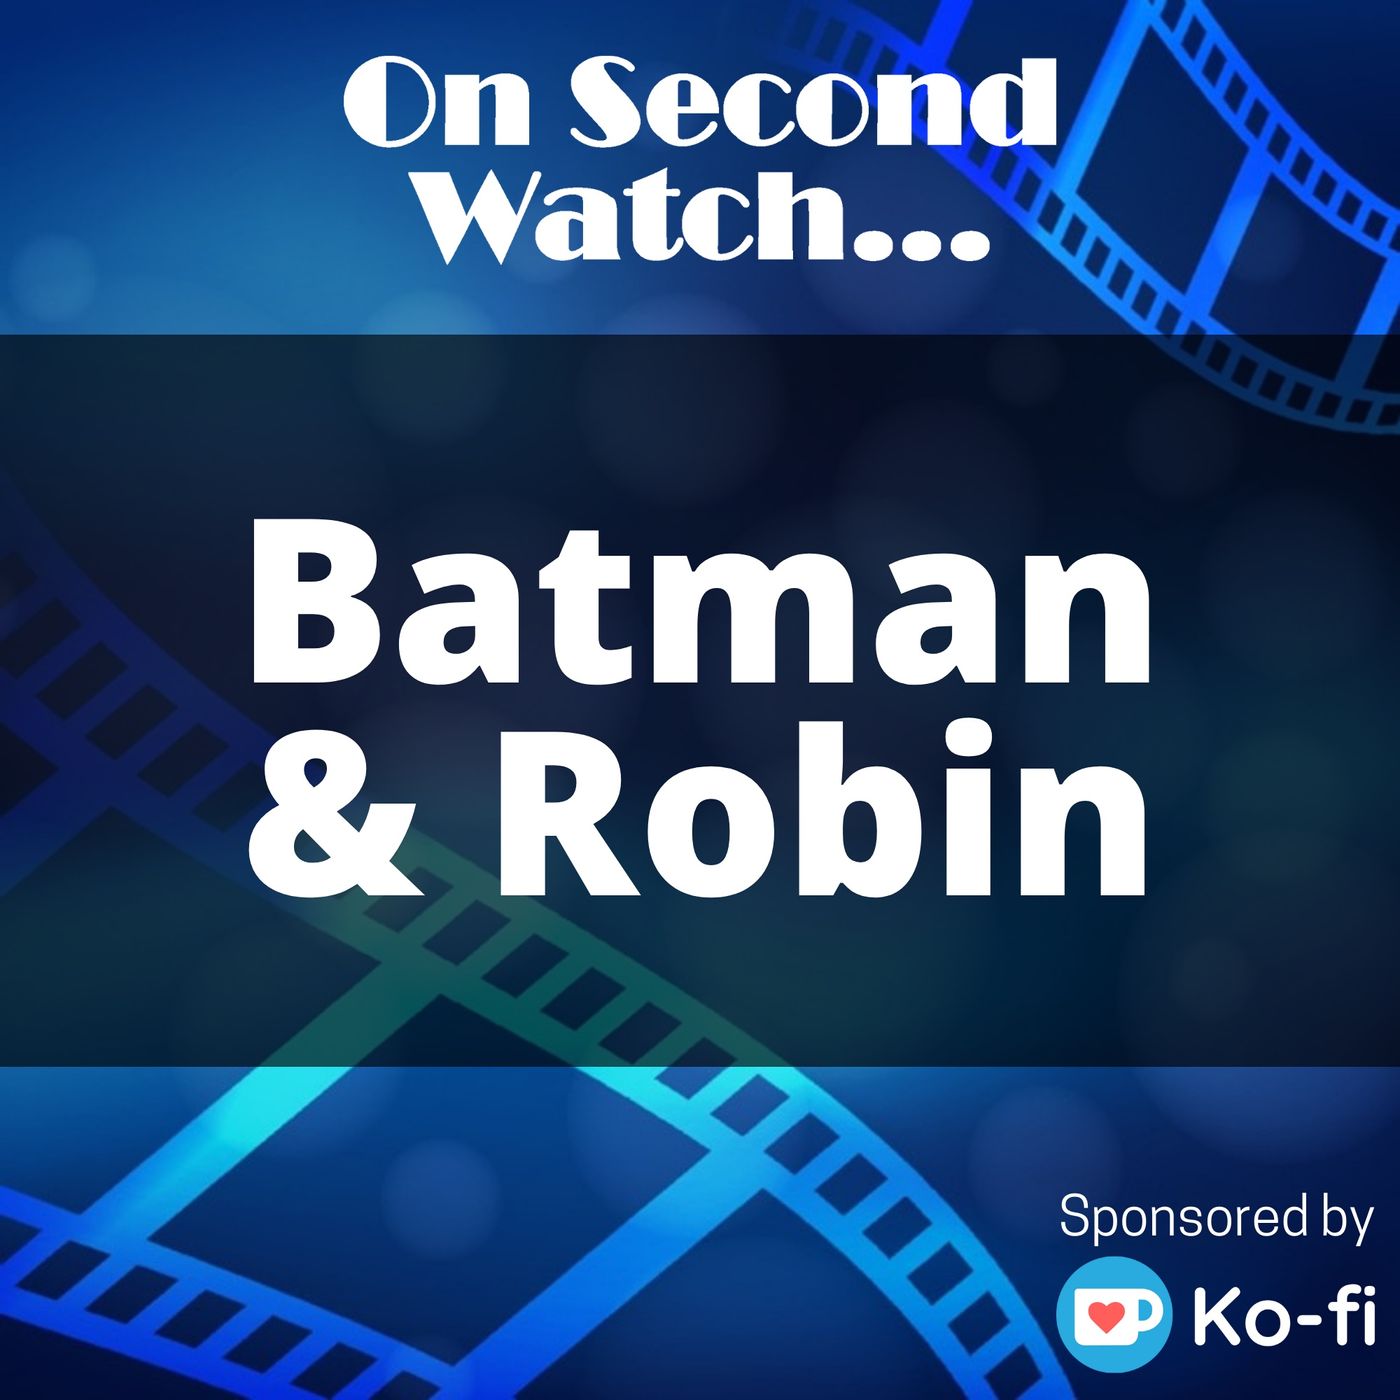 Batman and Robin (1997) - ”Let’s kick some ice!”